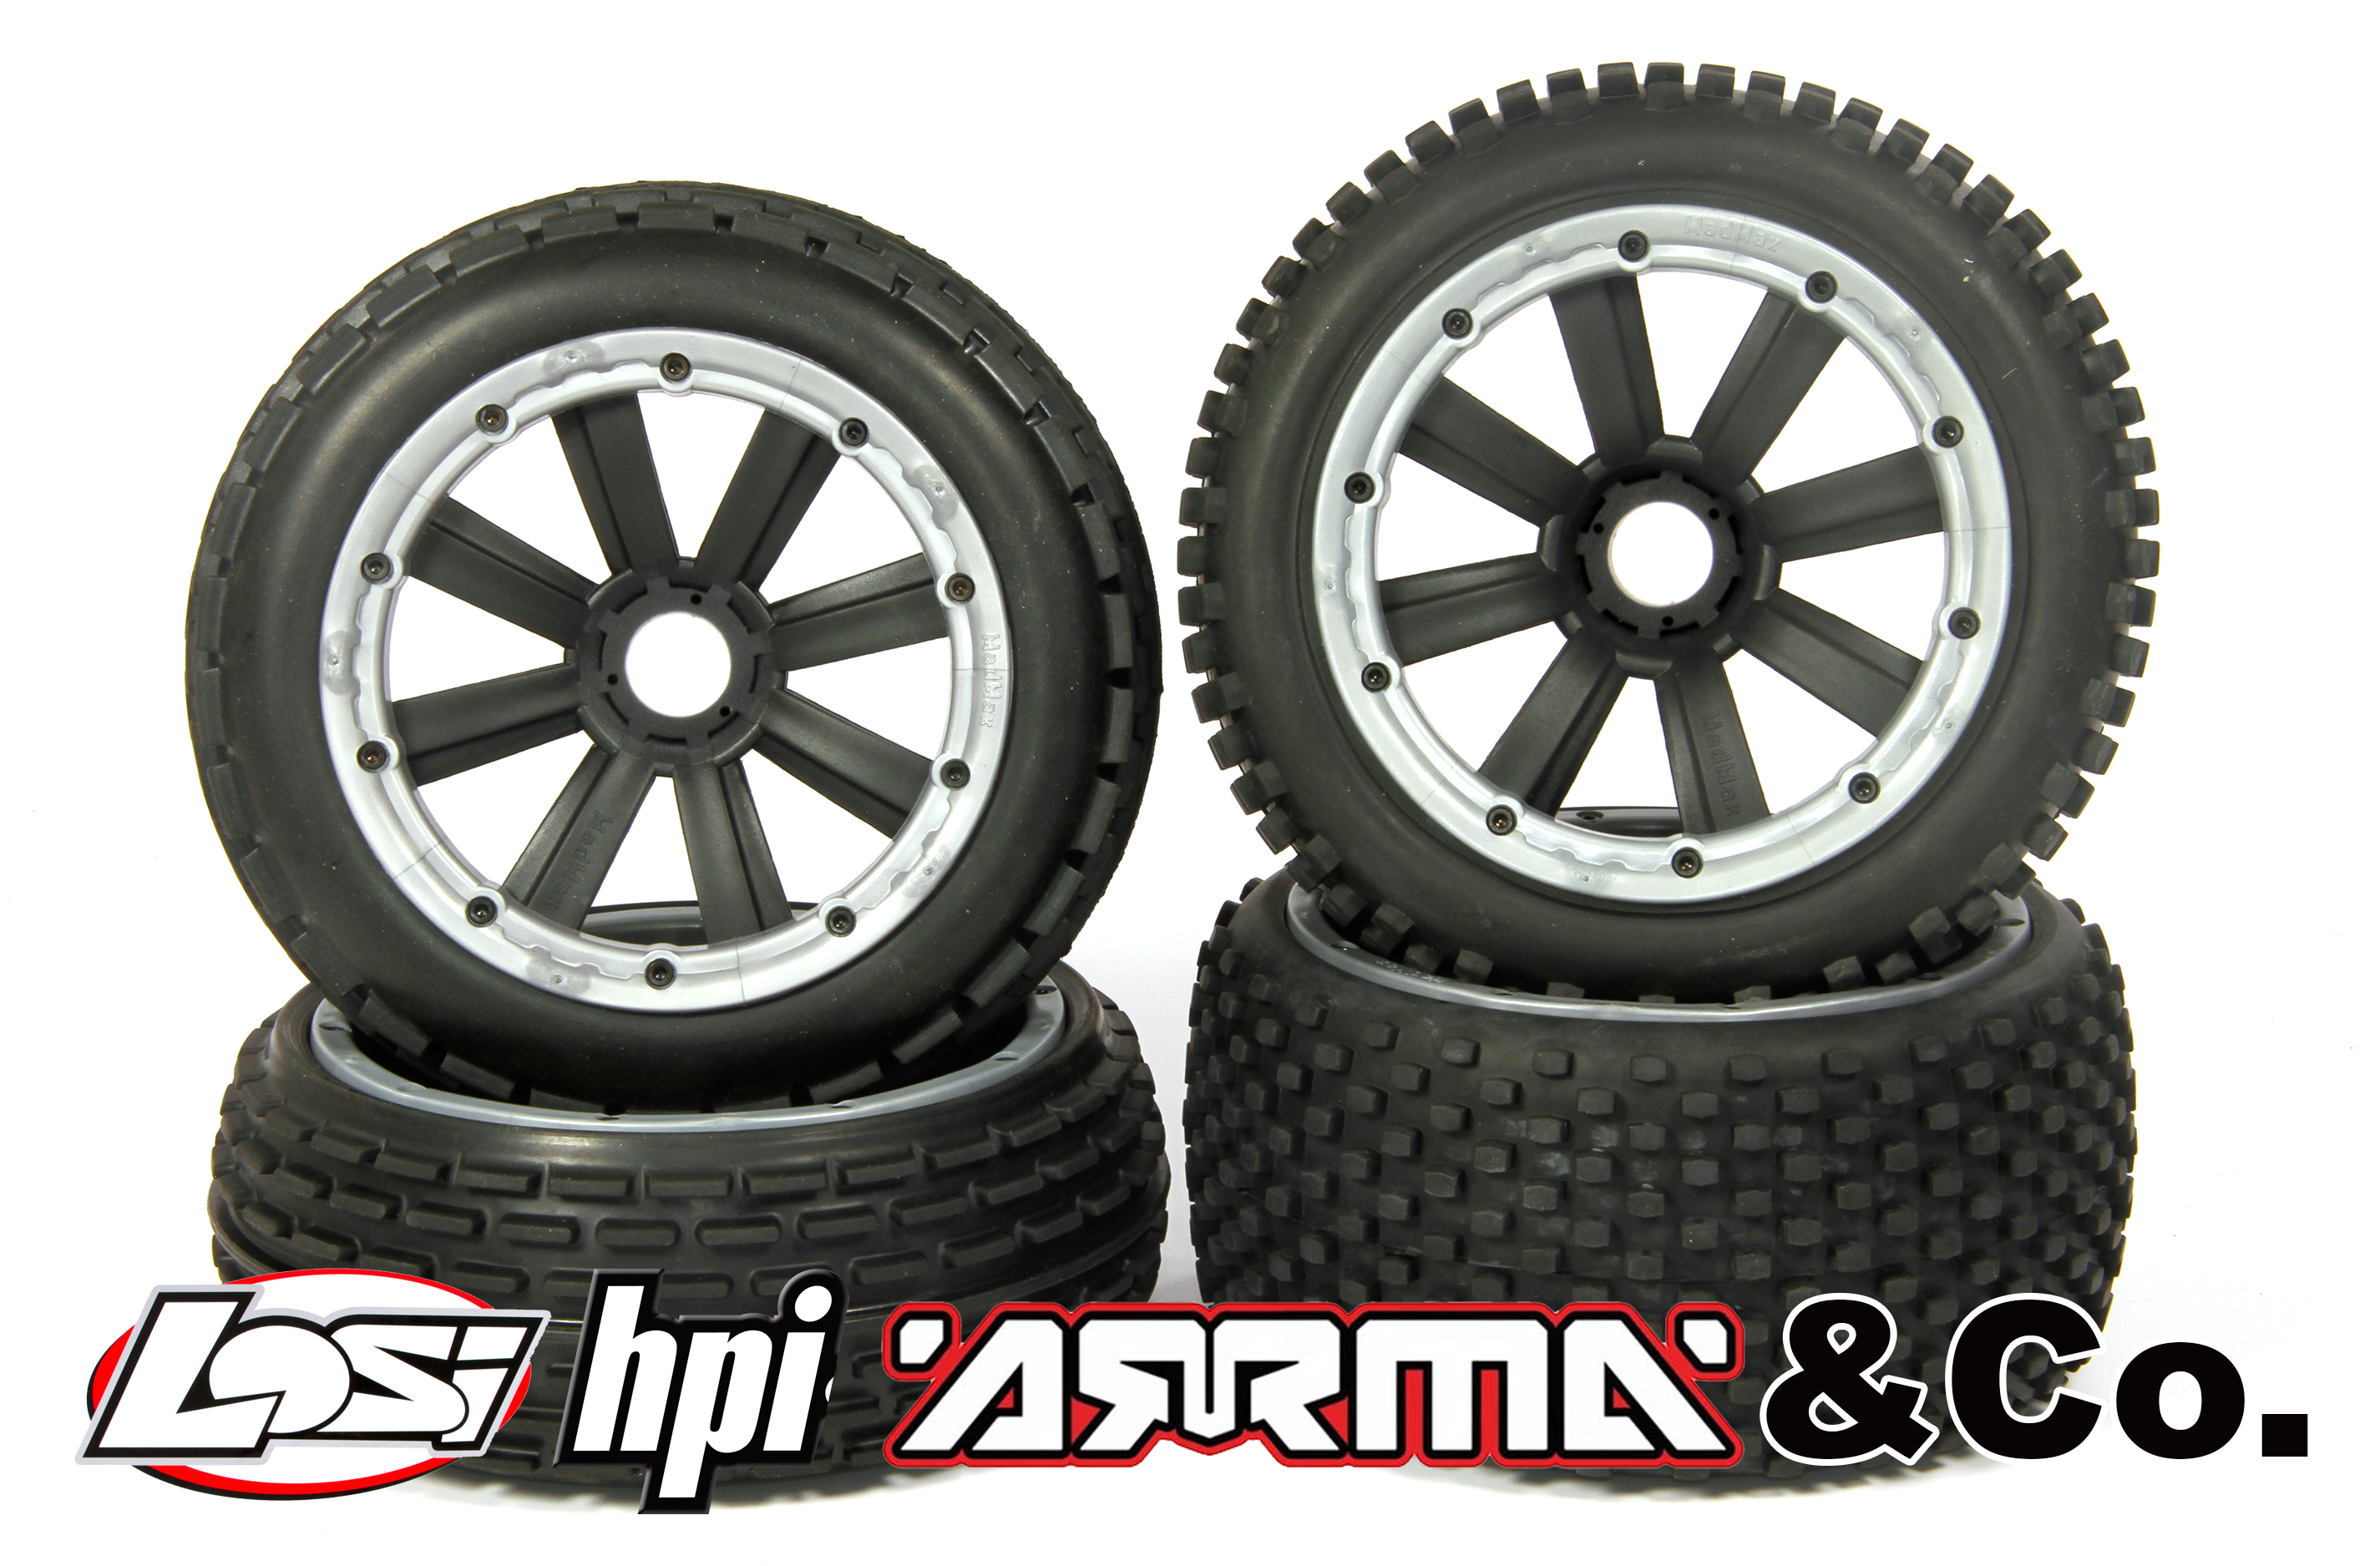 y1417/01 GPM - Ultragrip 170x80/x60 mm for Losi and HPI (24 mm hex drive) Offer